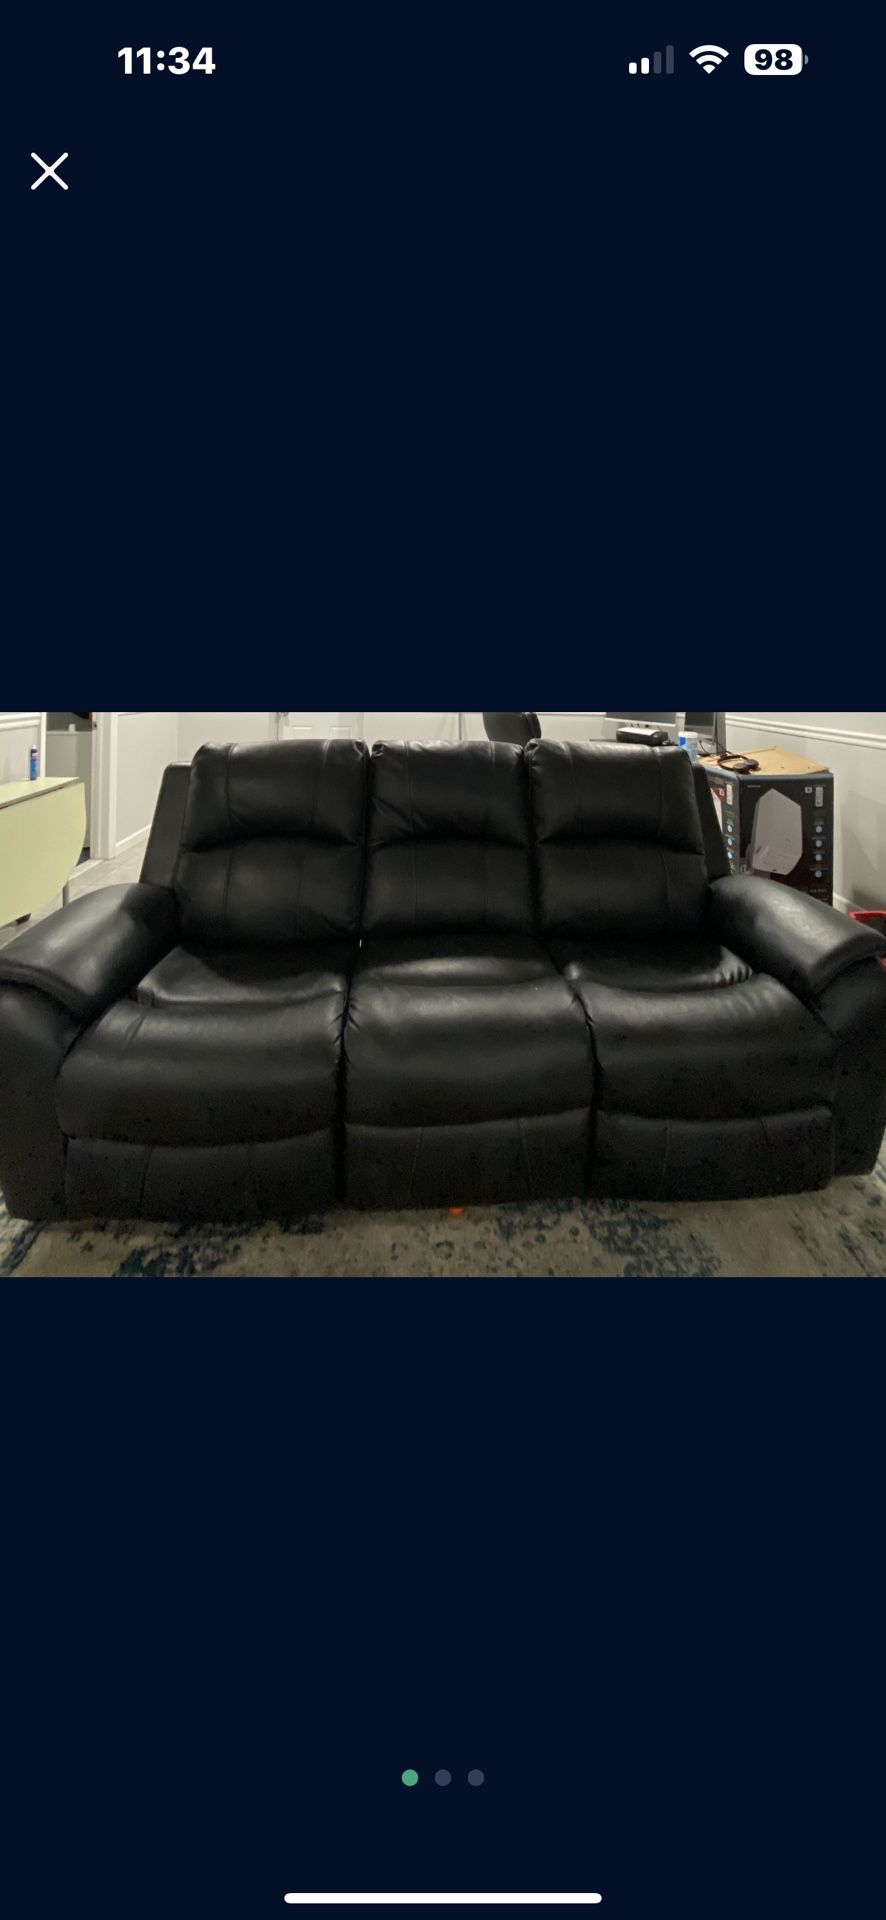 Leather Reclining sofa in charcoal leather. Gotham series